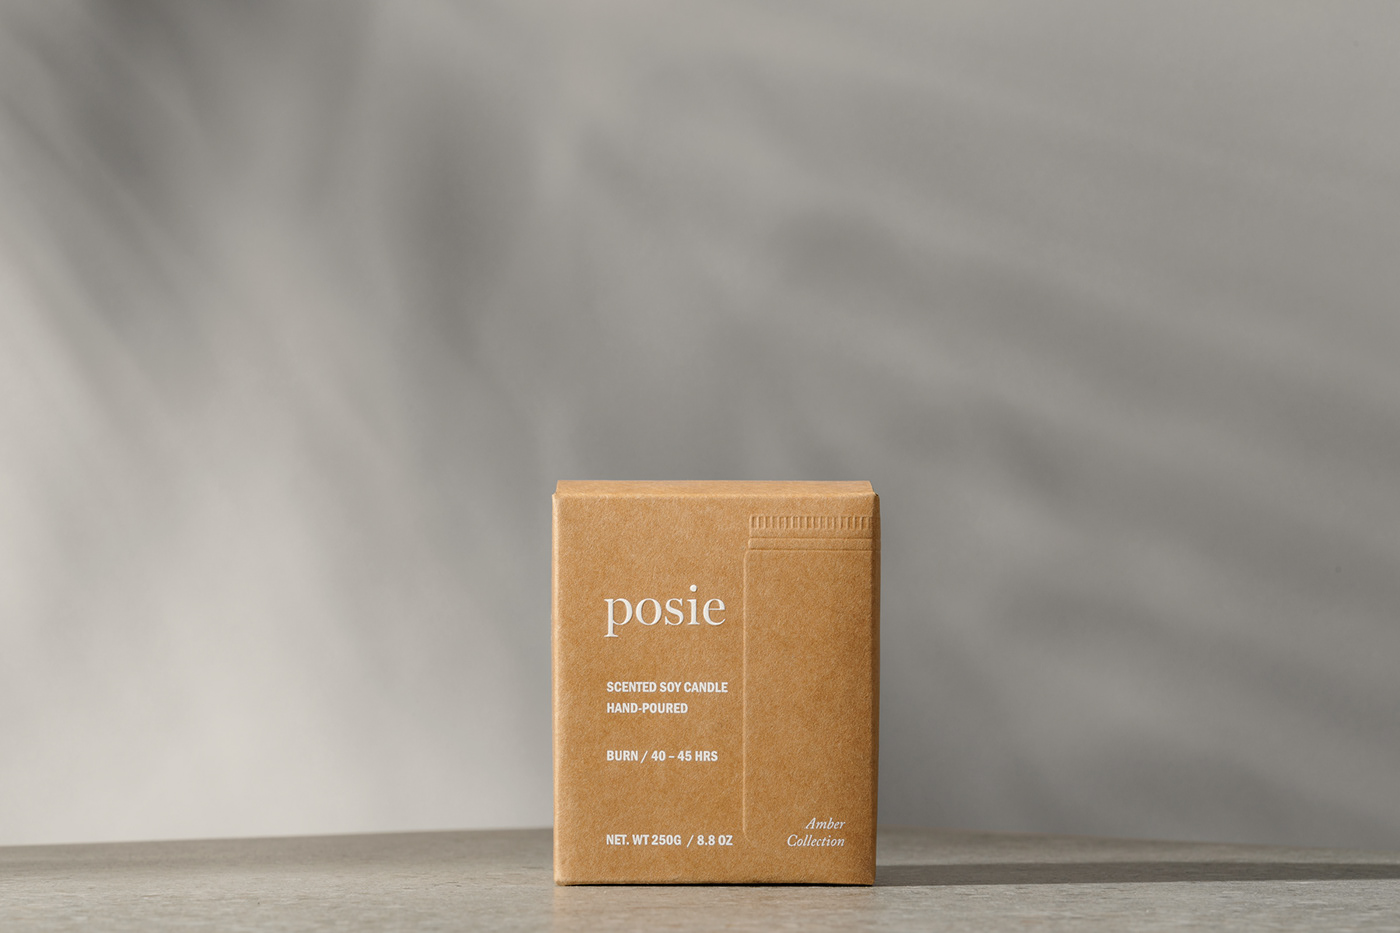 Posie soy candle kraft box sits in a naturally-lit studio environment